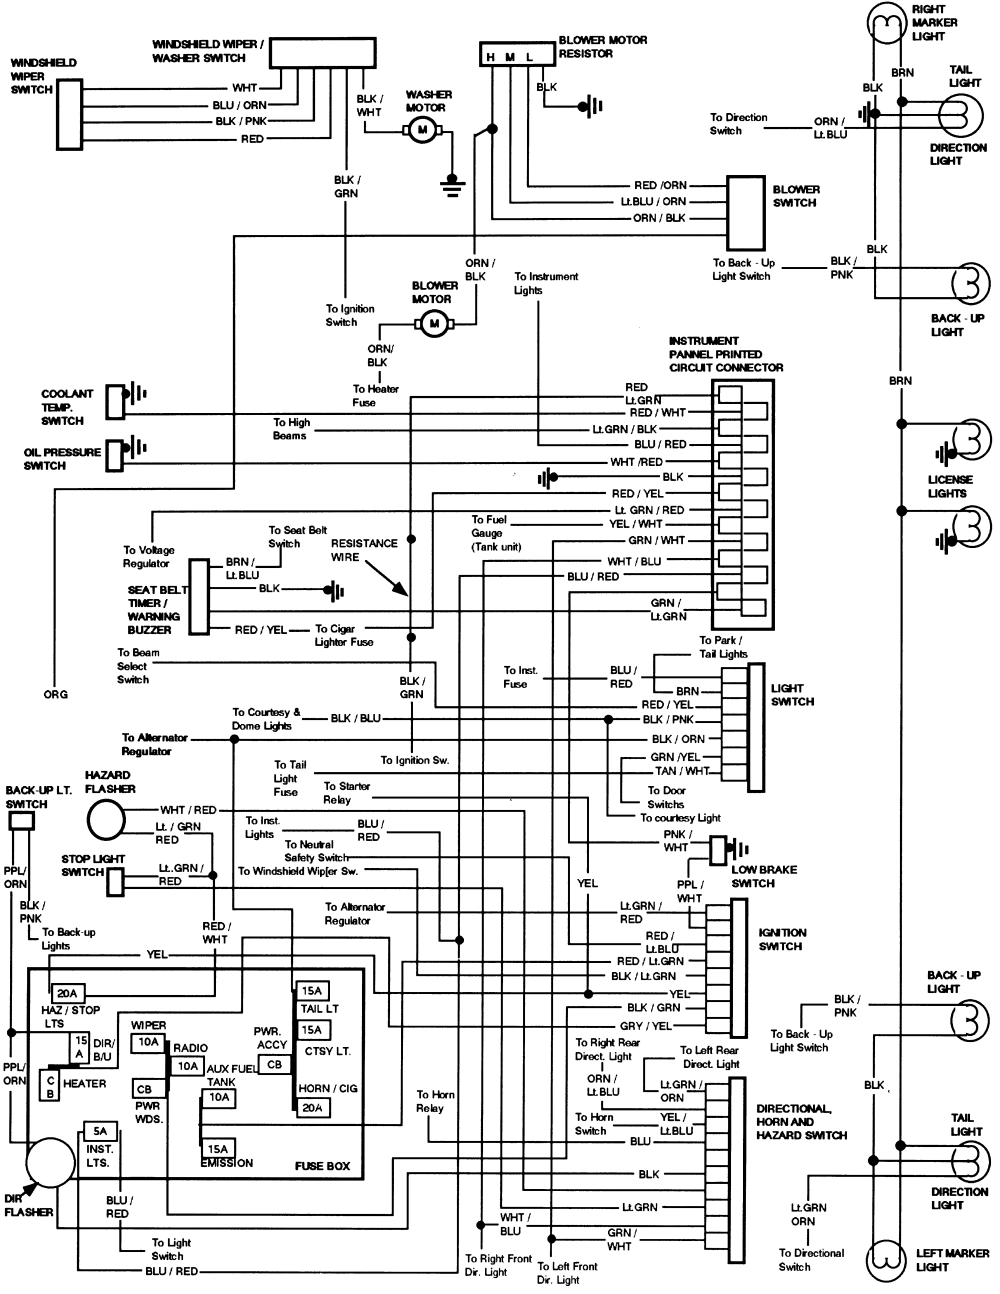 1994 Ford Ranger Stereo Wiring Diagram from broncozone.com